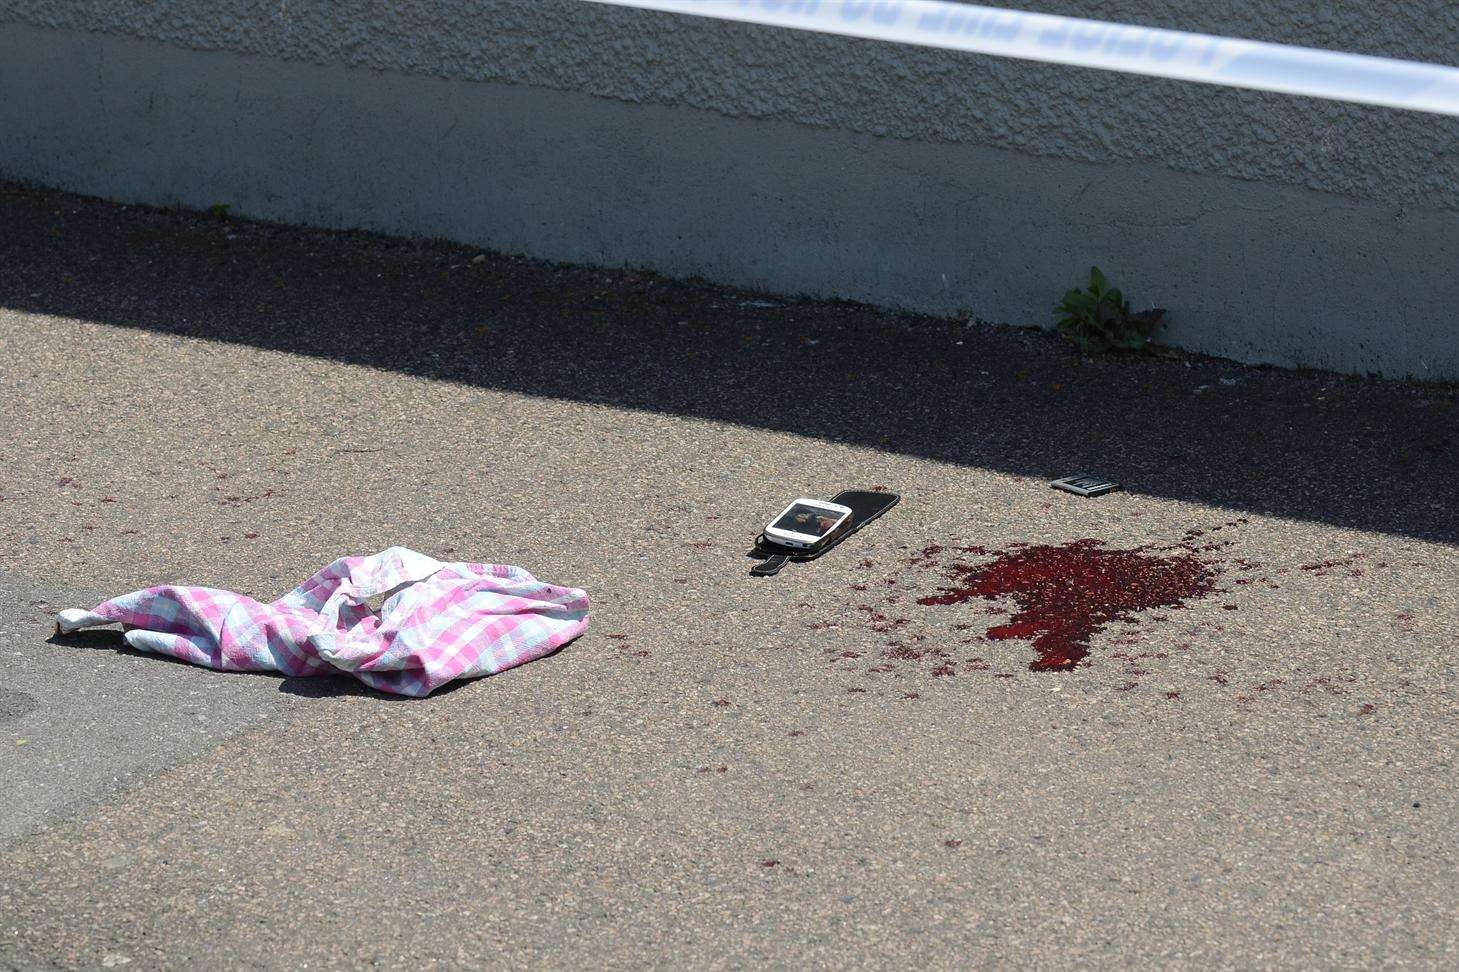 A pool of blood at the scene of the stabbing